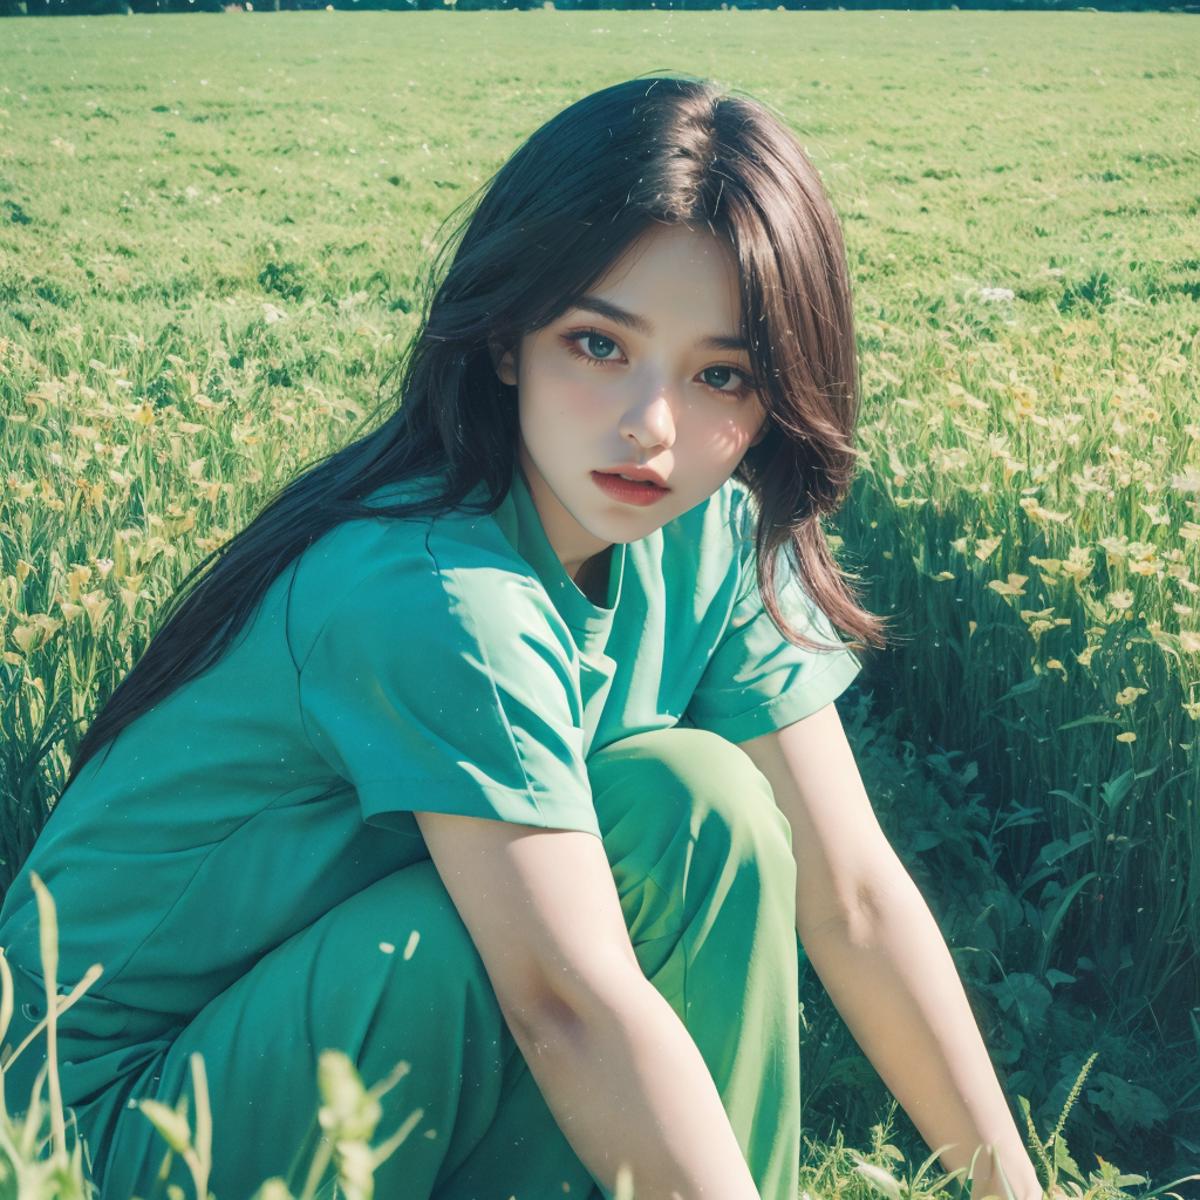 A woman in a green shirt and pants is sitting in the grass.